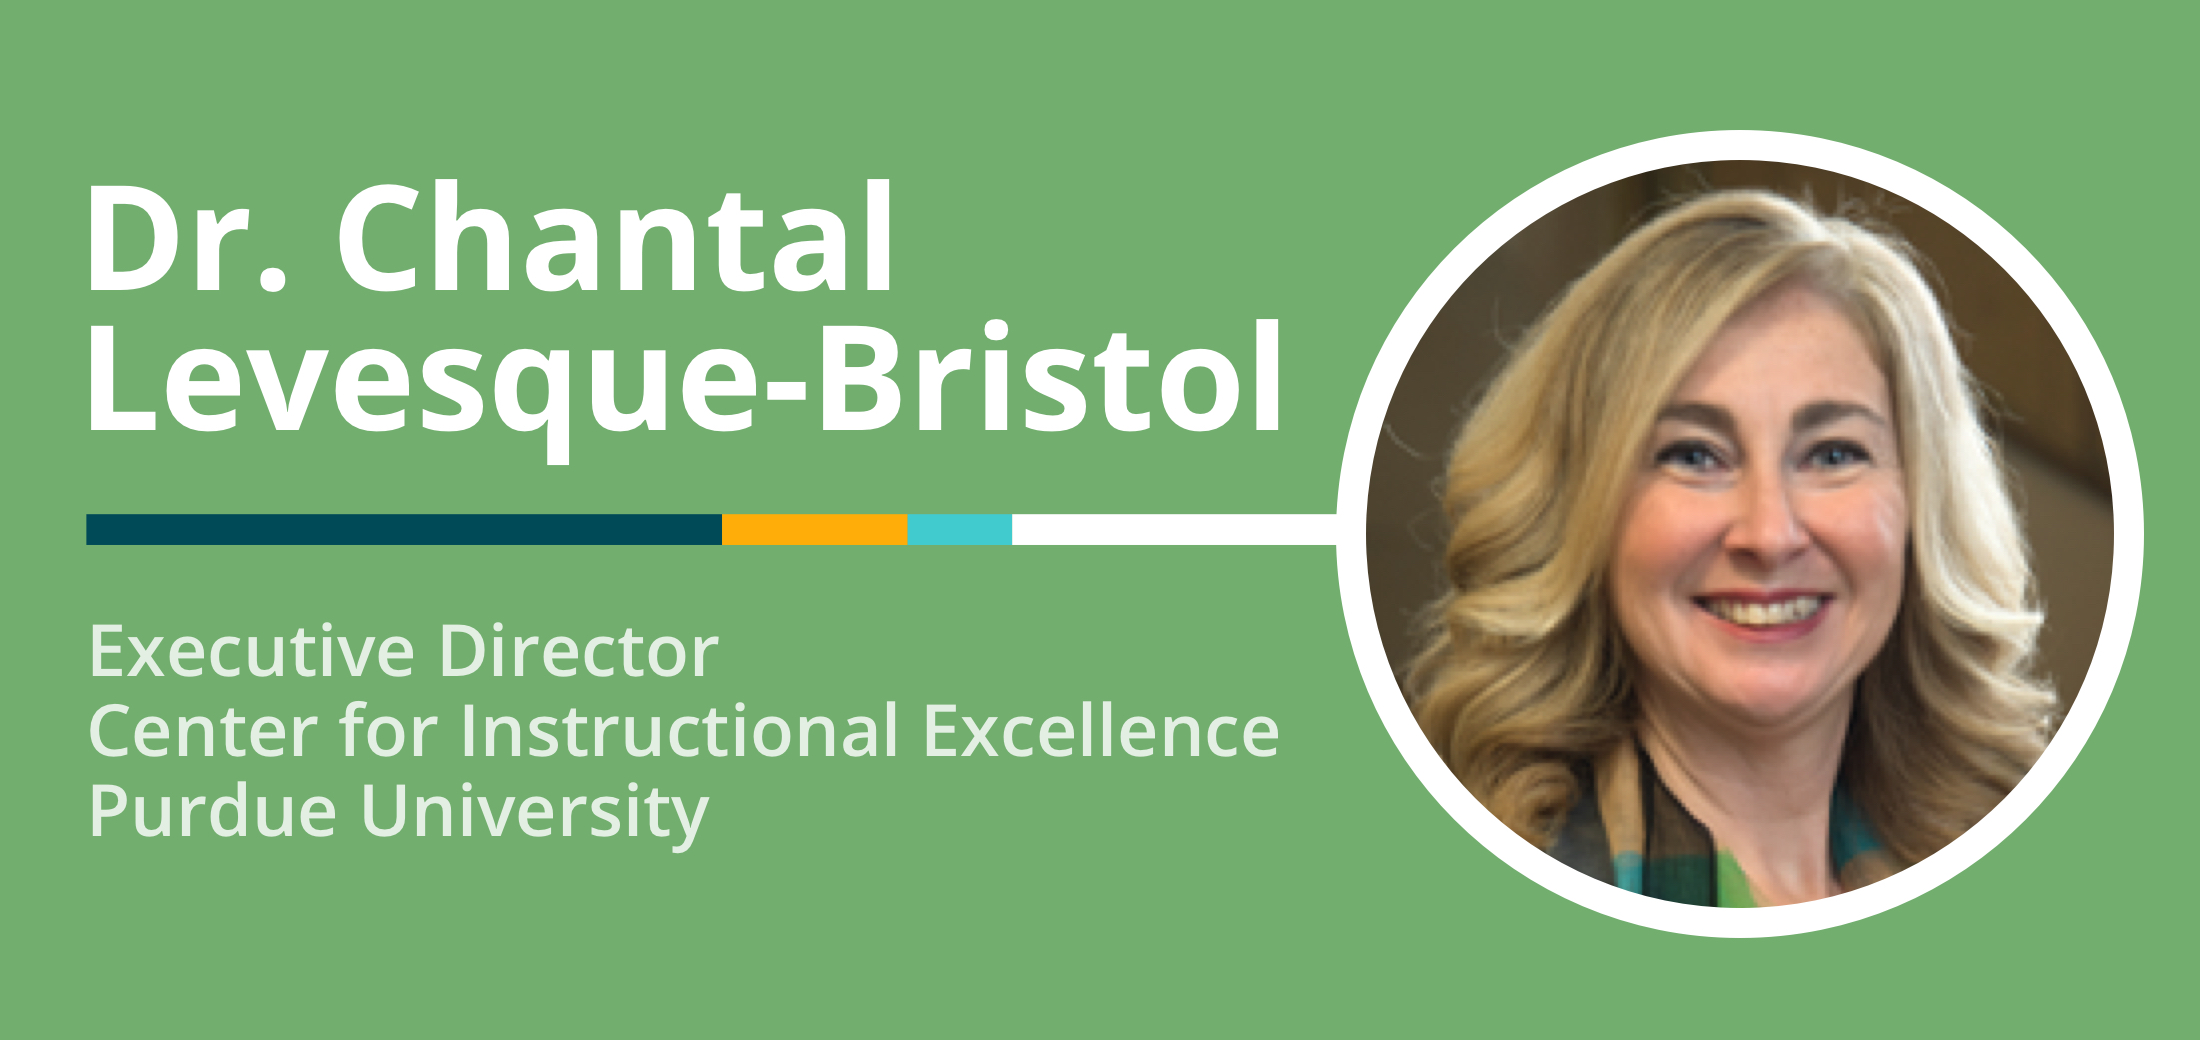 Dr. Chantal Levesque-Bristol, Executive Director of the Center for Instructional Excellence, Purdue University